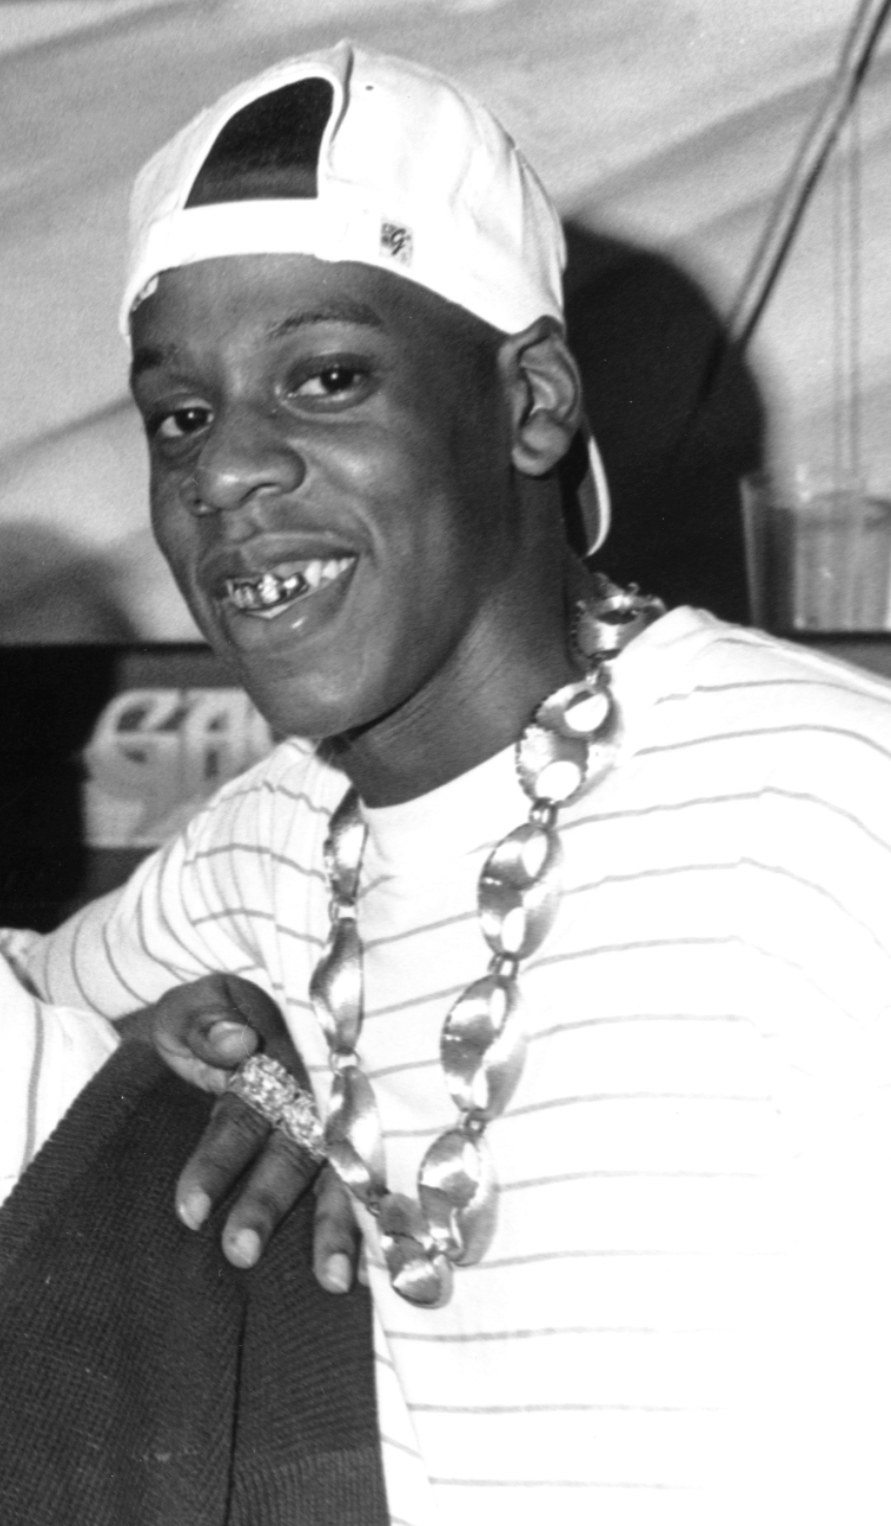 Jay-Z with gold teeth, backwards hat, and a chain